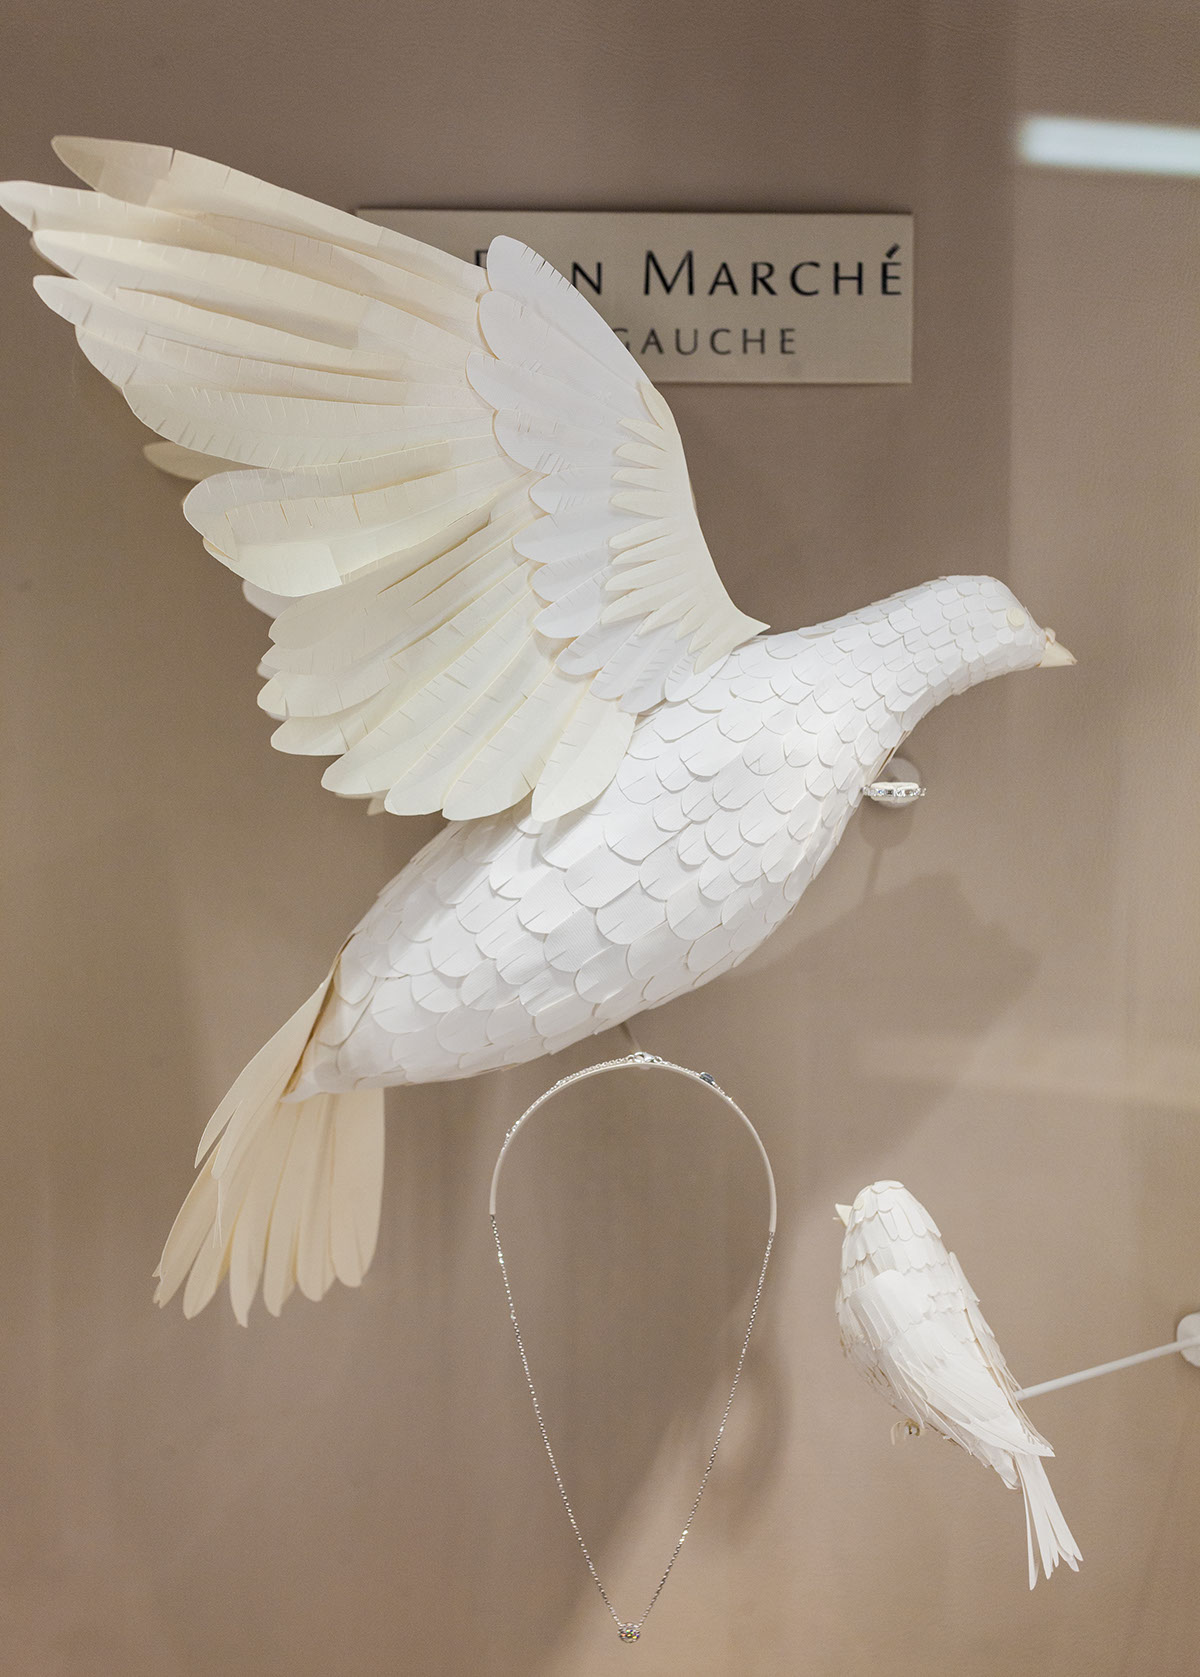 birds Le Bon marché paper Display fine jewelry showcase Poiray fred White hand made